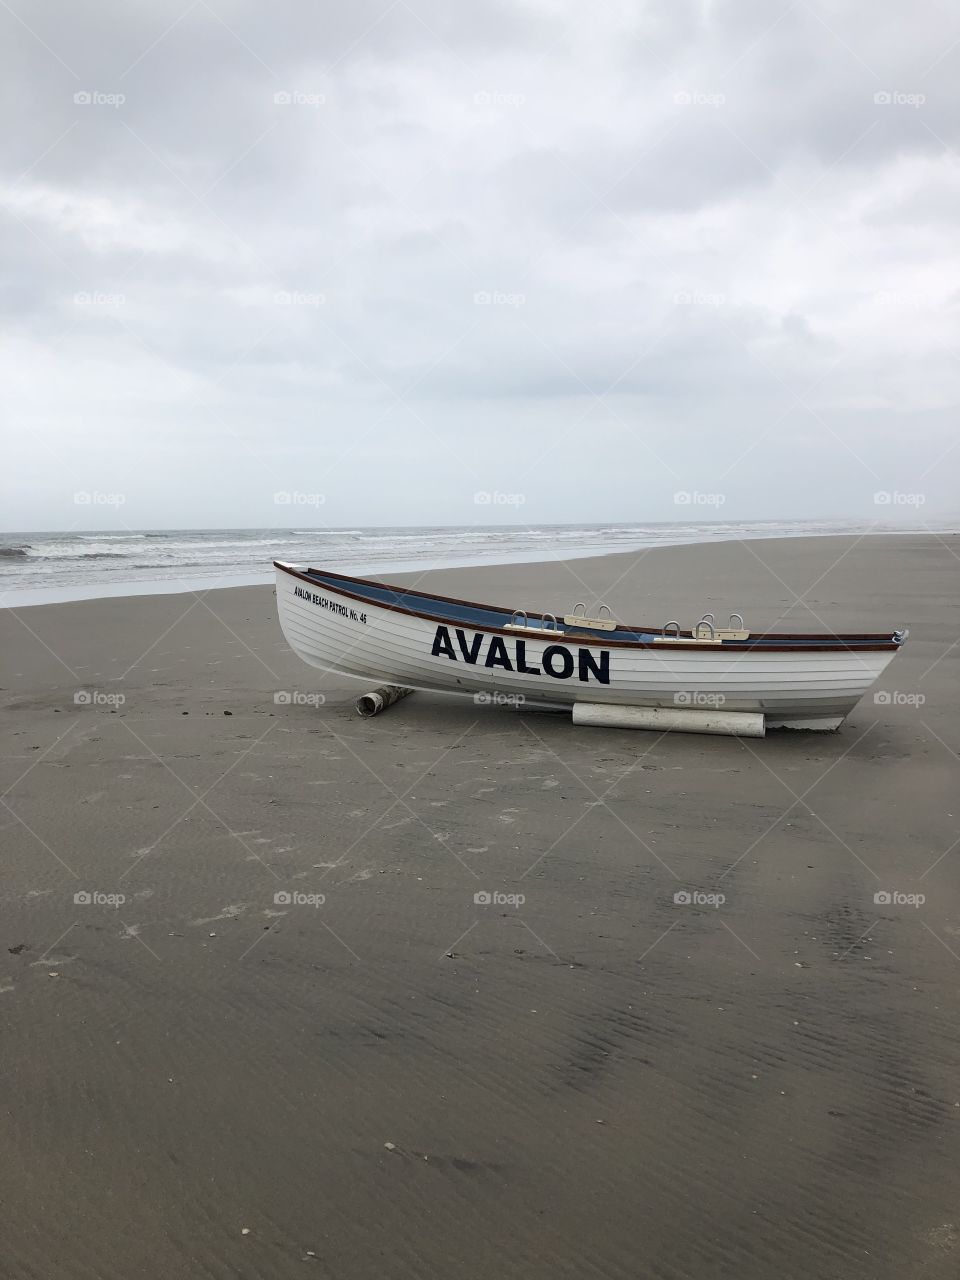 A lifeboat sits on a deserted beach in Avalon, New Jersey.